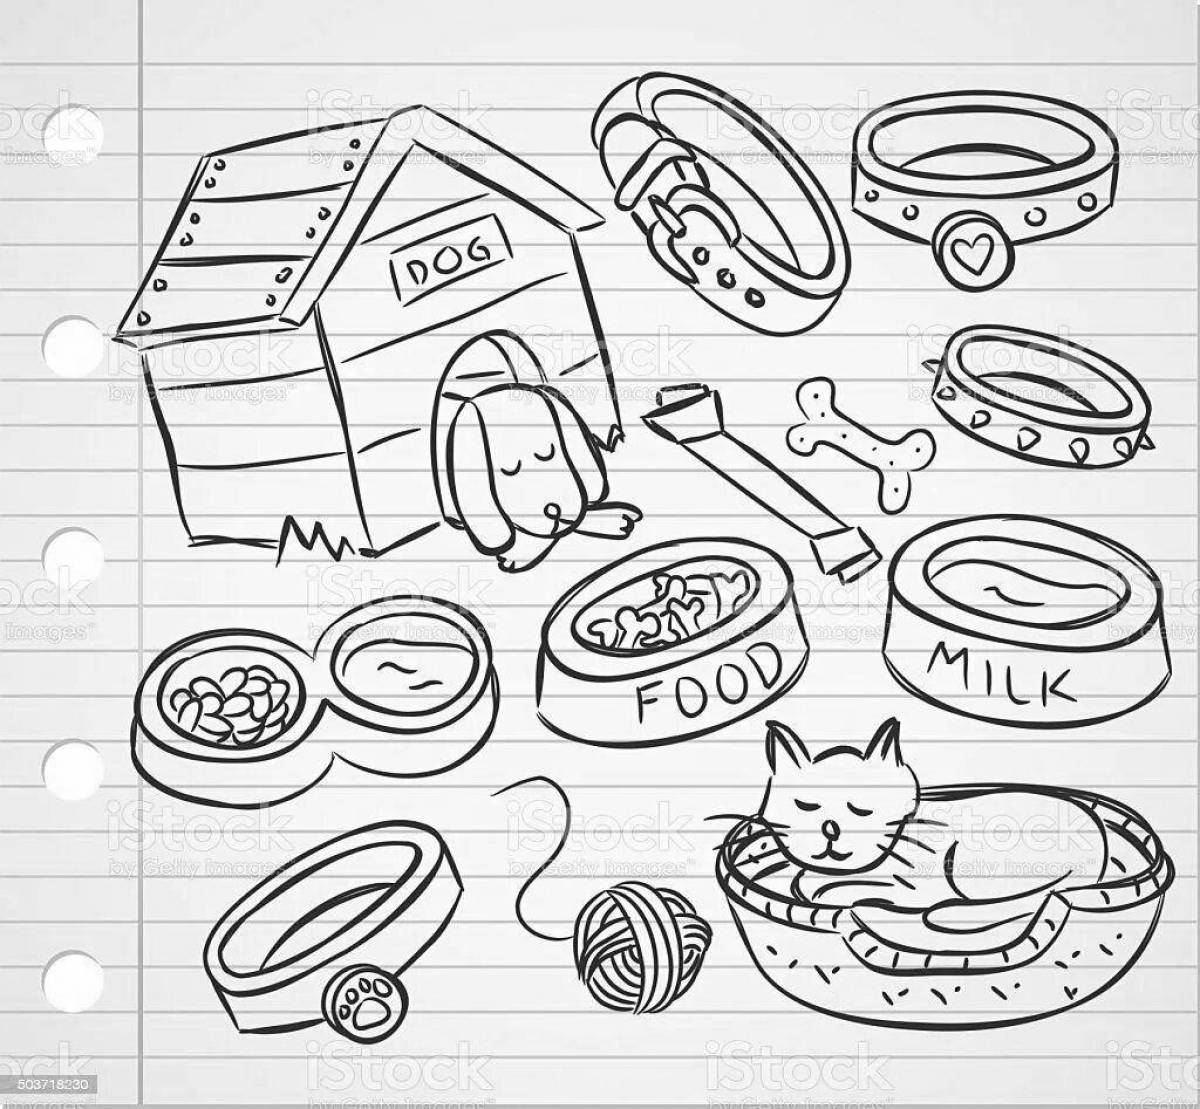 Live dog food coloring page